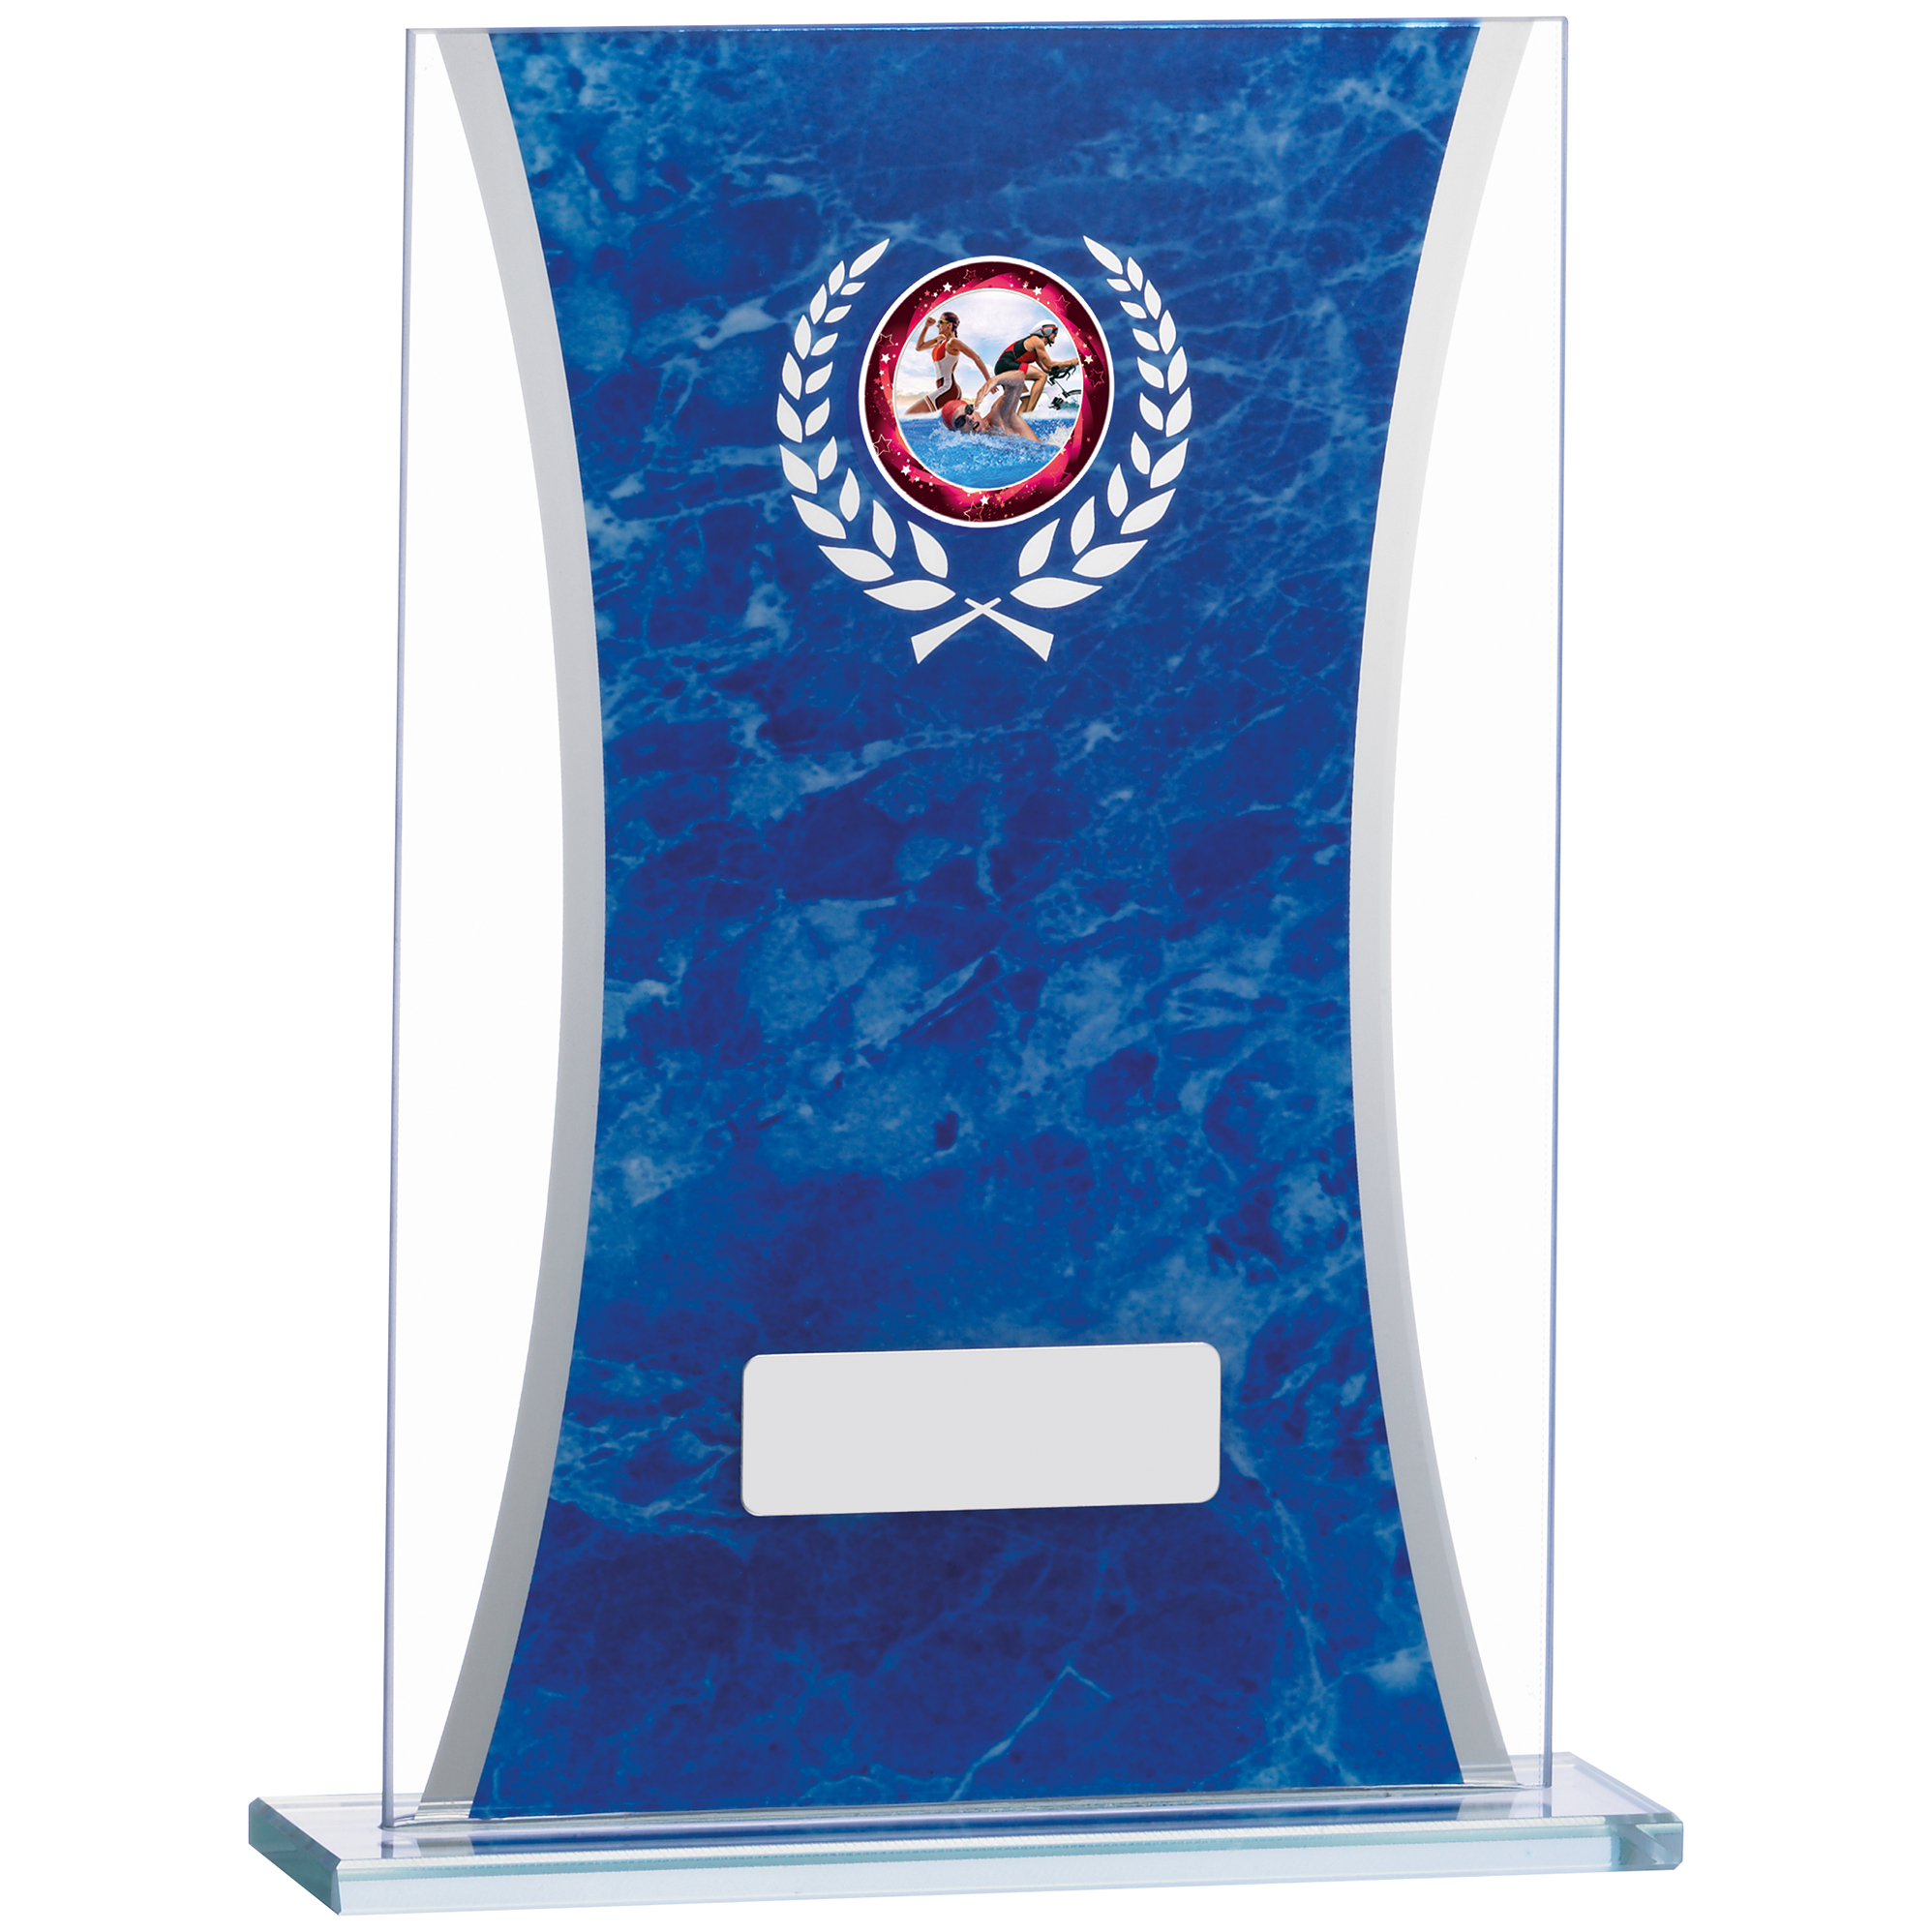 7.25'' BLUE MARBLE MIRRORED GLASS AWARD